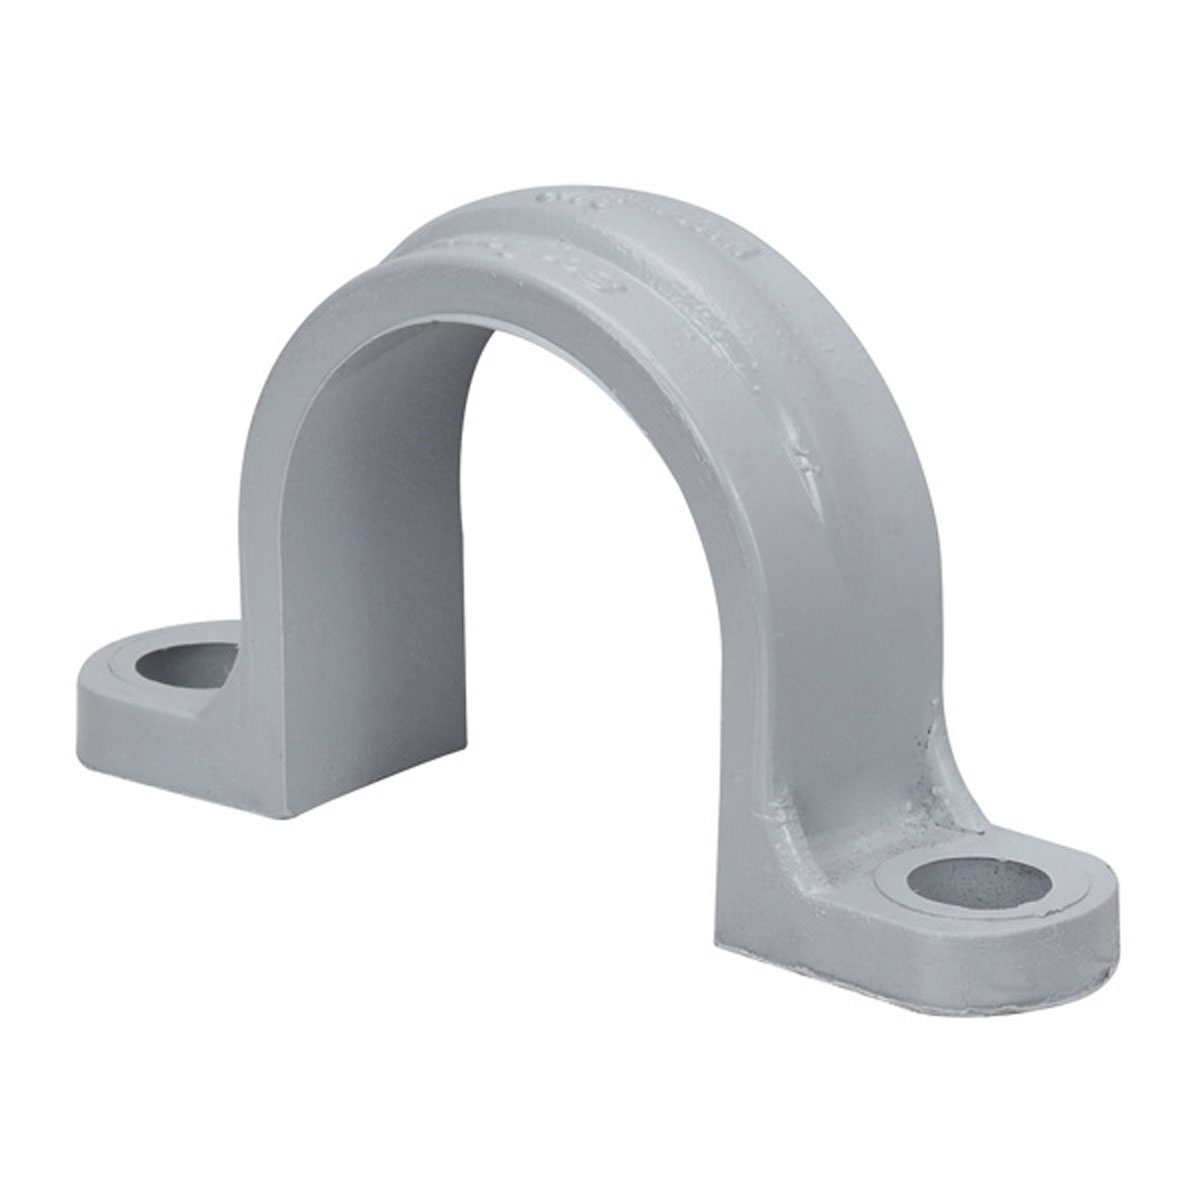 1 1/4" 2-Hole Pipe Clamp